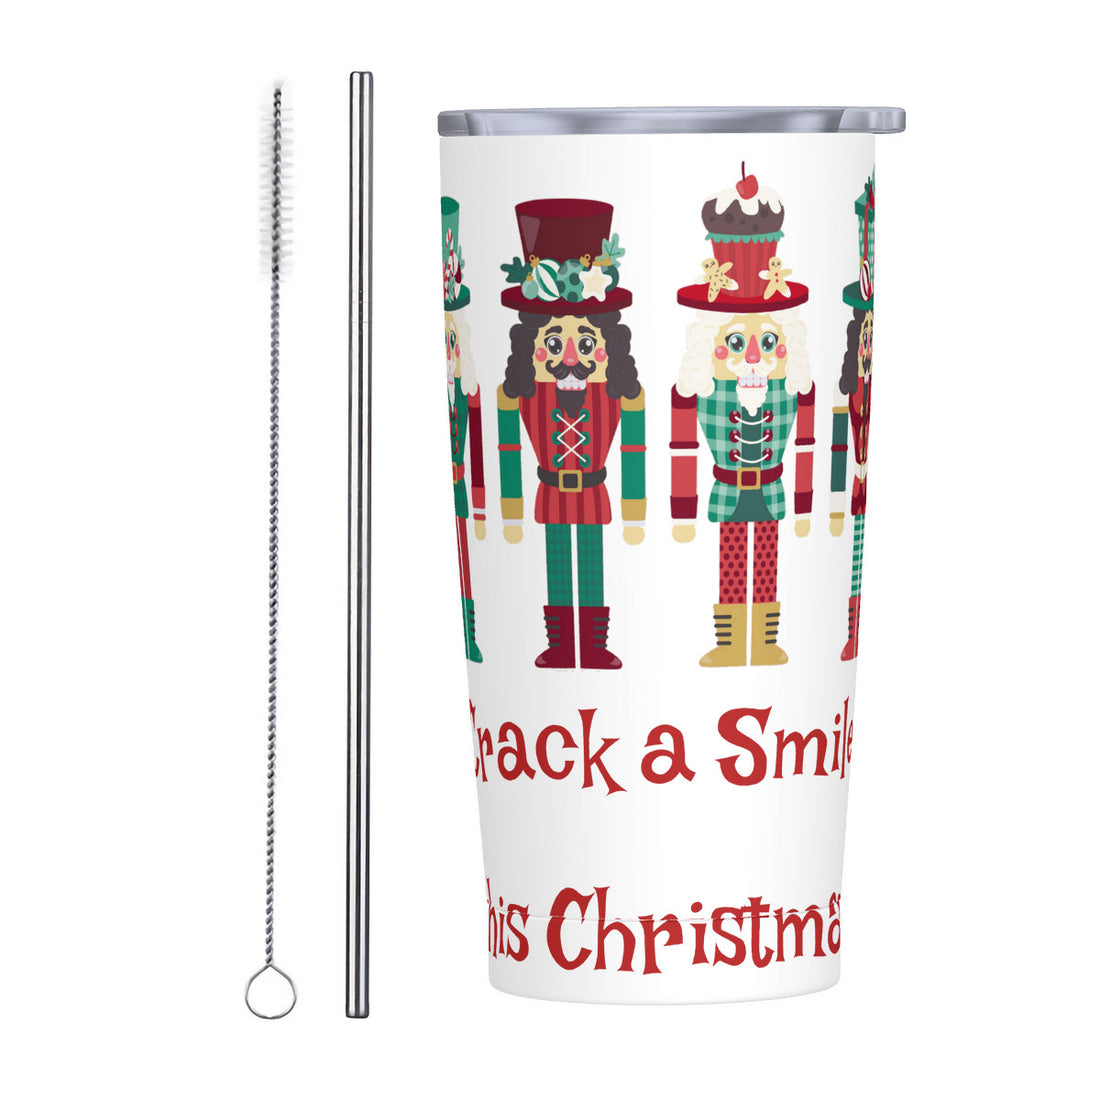 Stainless Steel Straw Lid Cup Crack a Smile this Christmas Nutcrackers decoration Home-clothes-jewelry